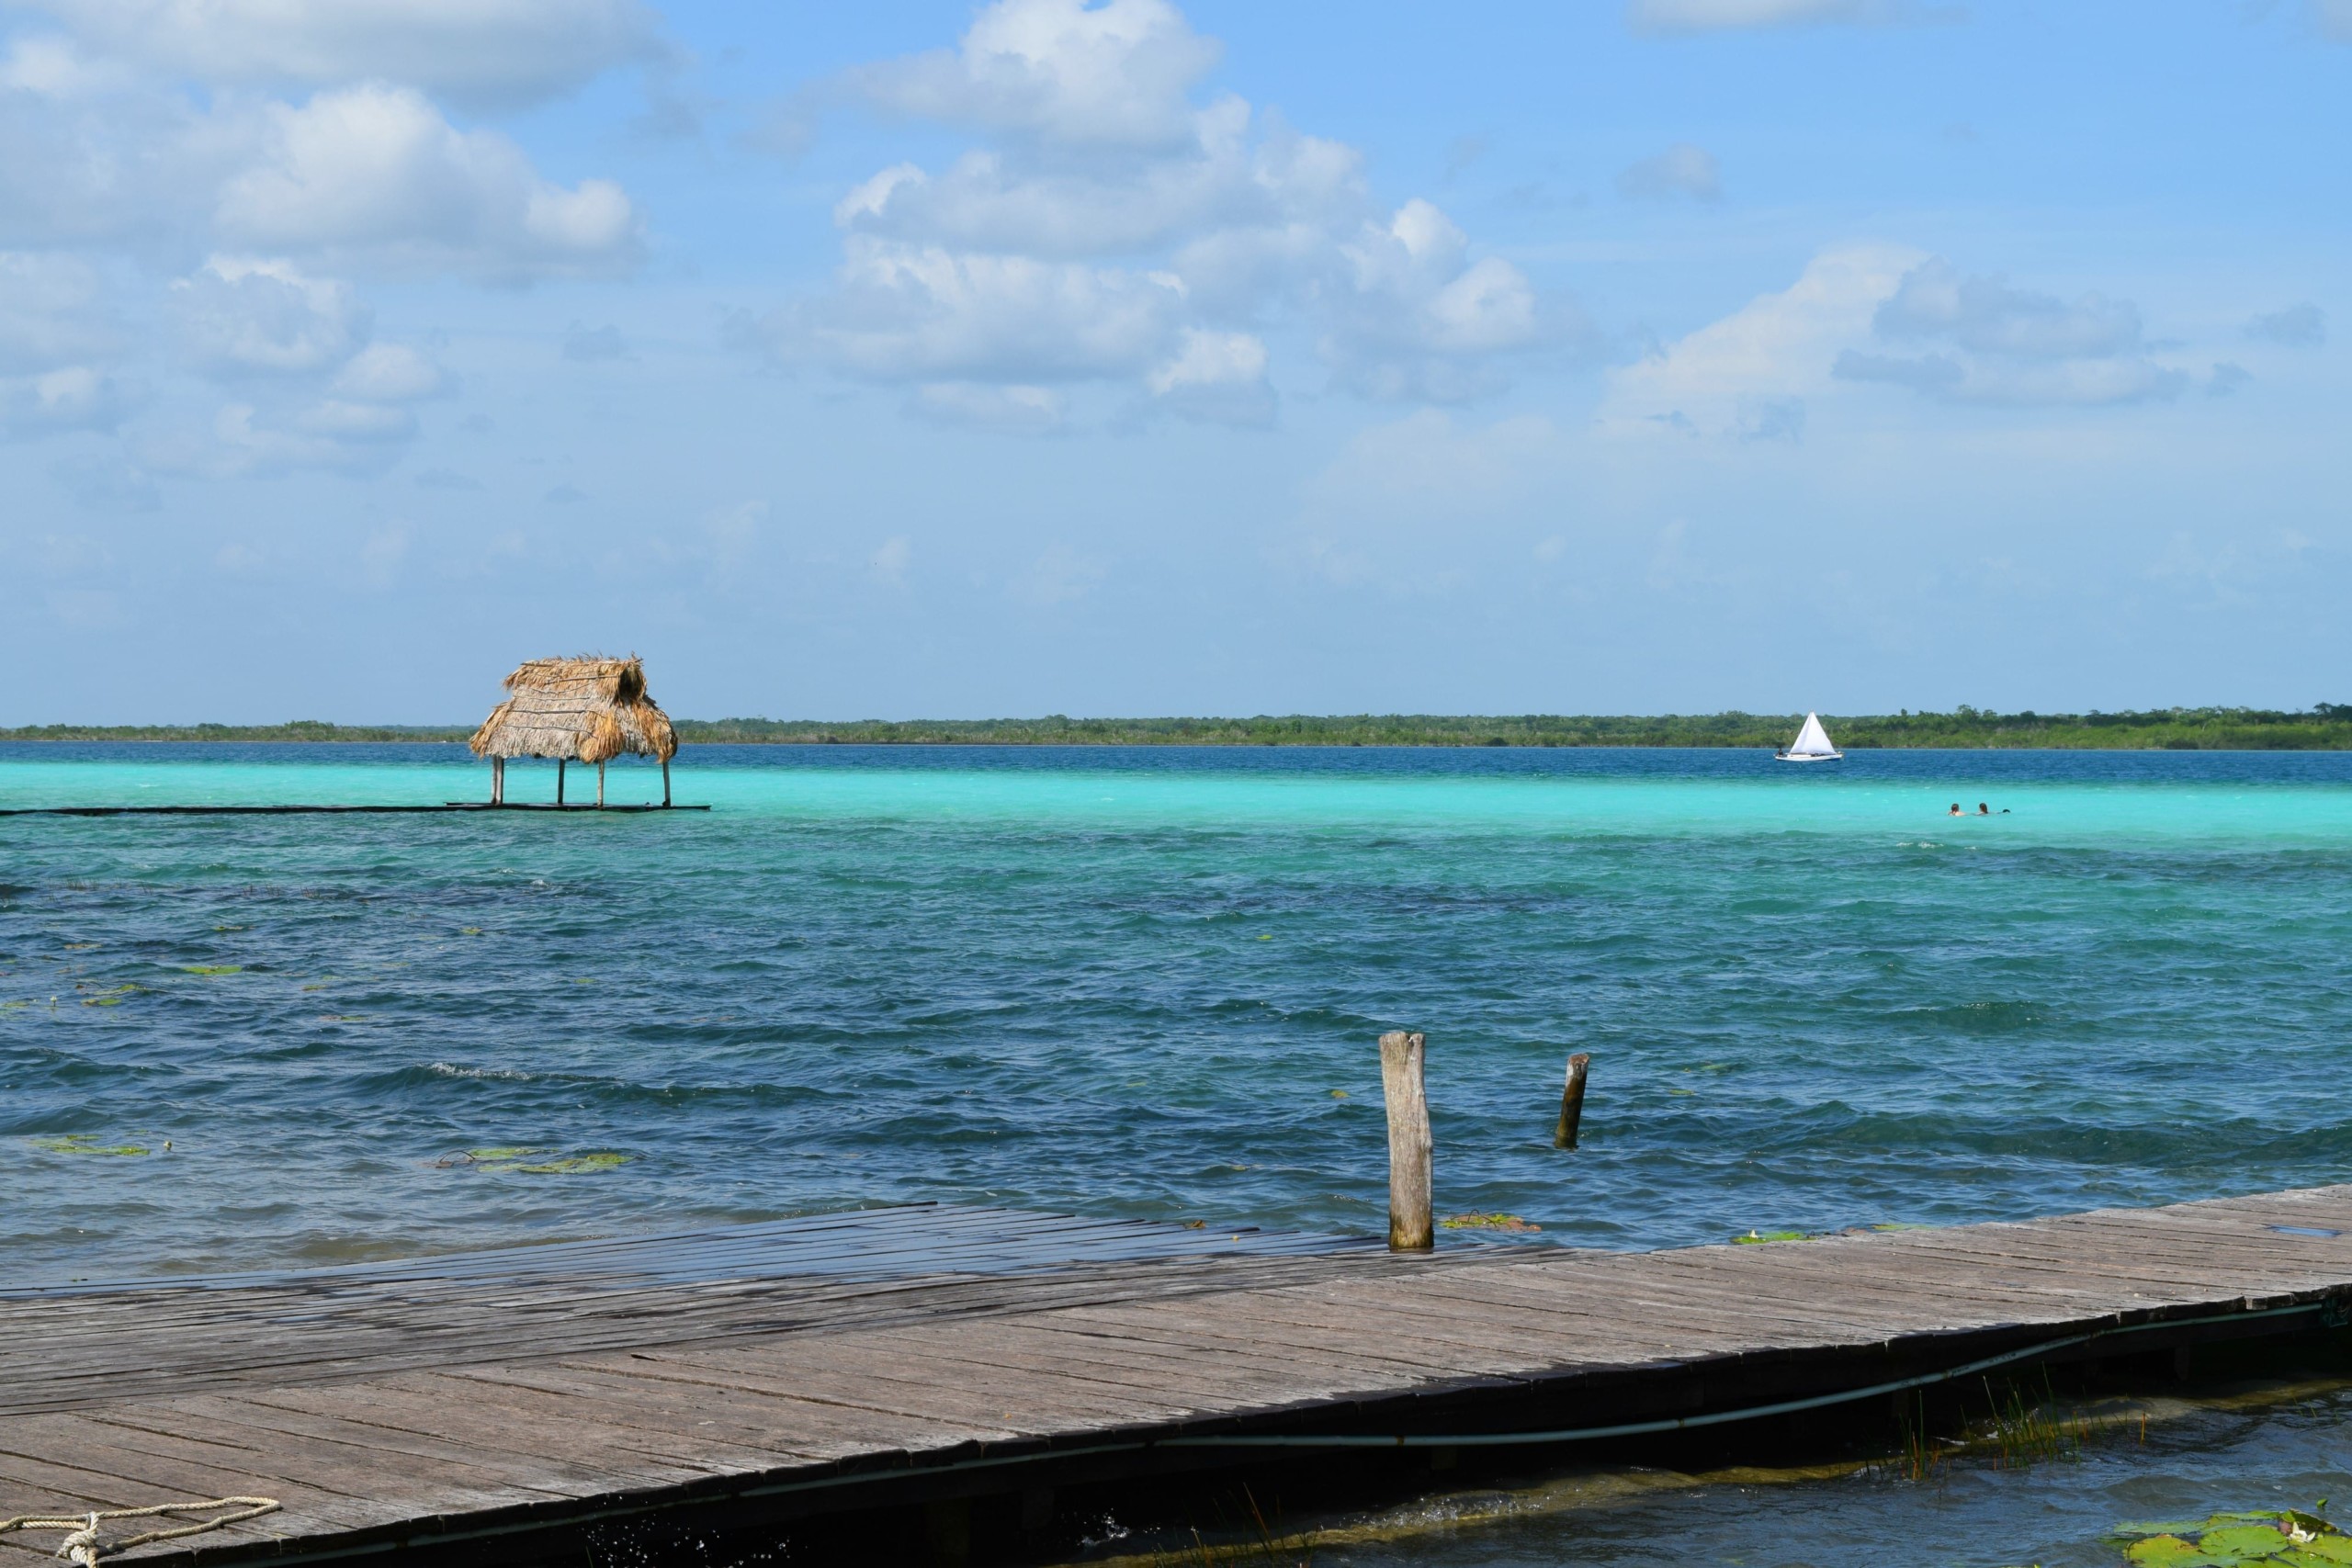 a dock in Caribbean waters. The Lagoon of Seven Colors, Bacalar, Mexico